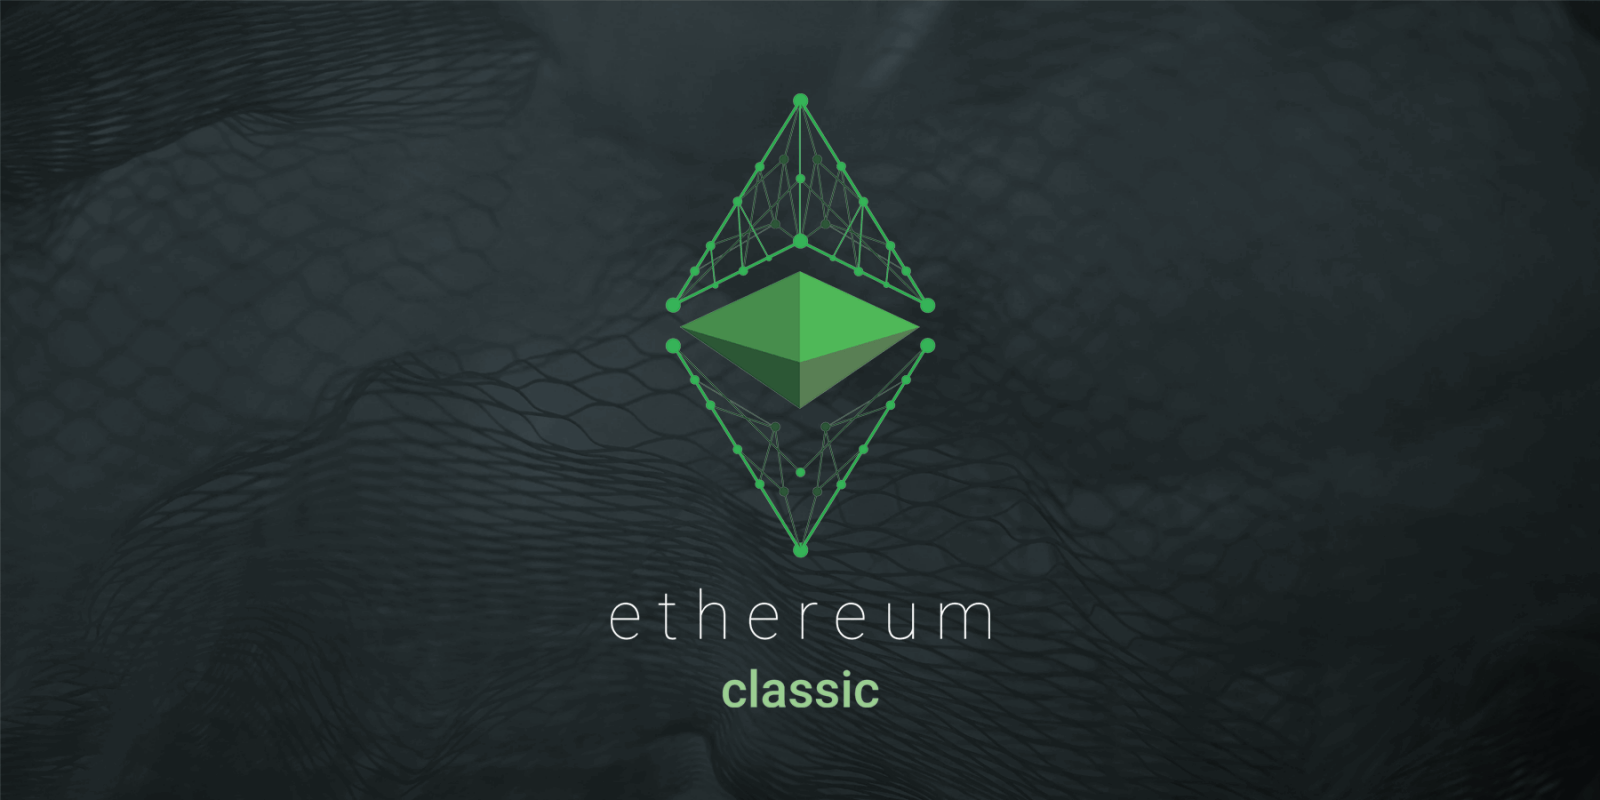 what is the cap on ethereum classic